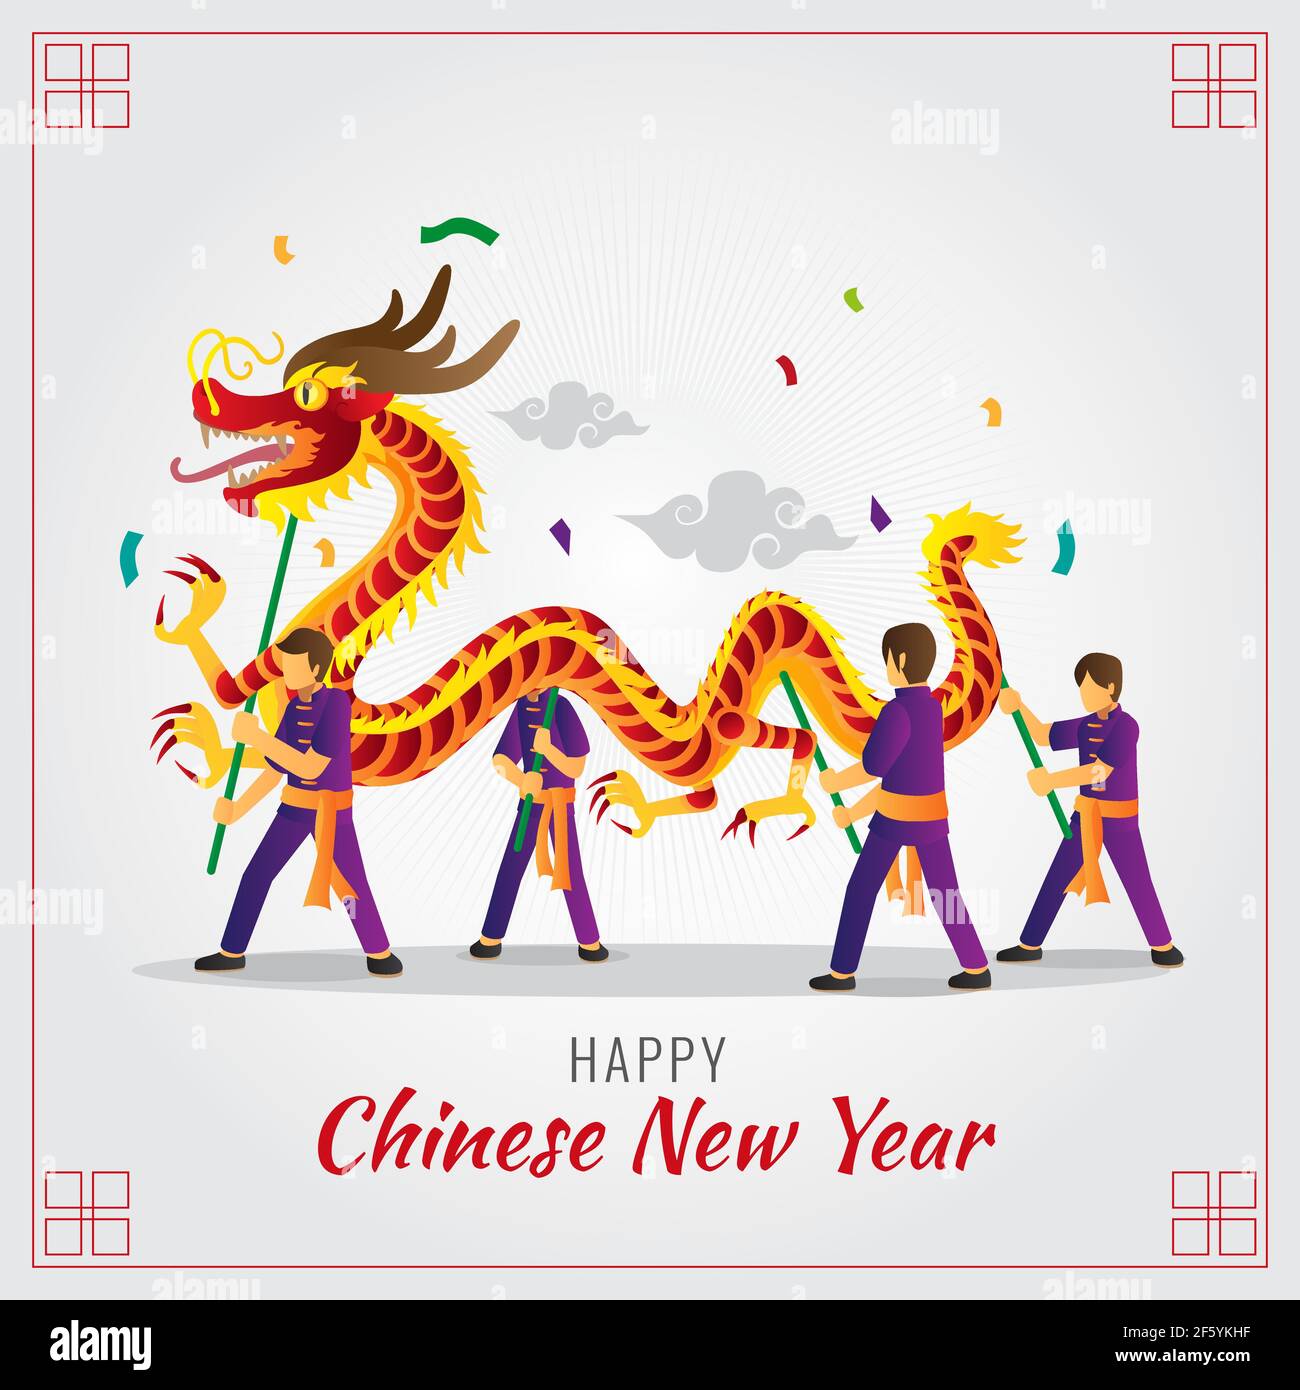 Chinese new year dragon dance illustration Stock Vector